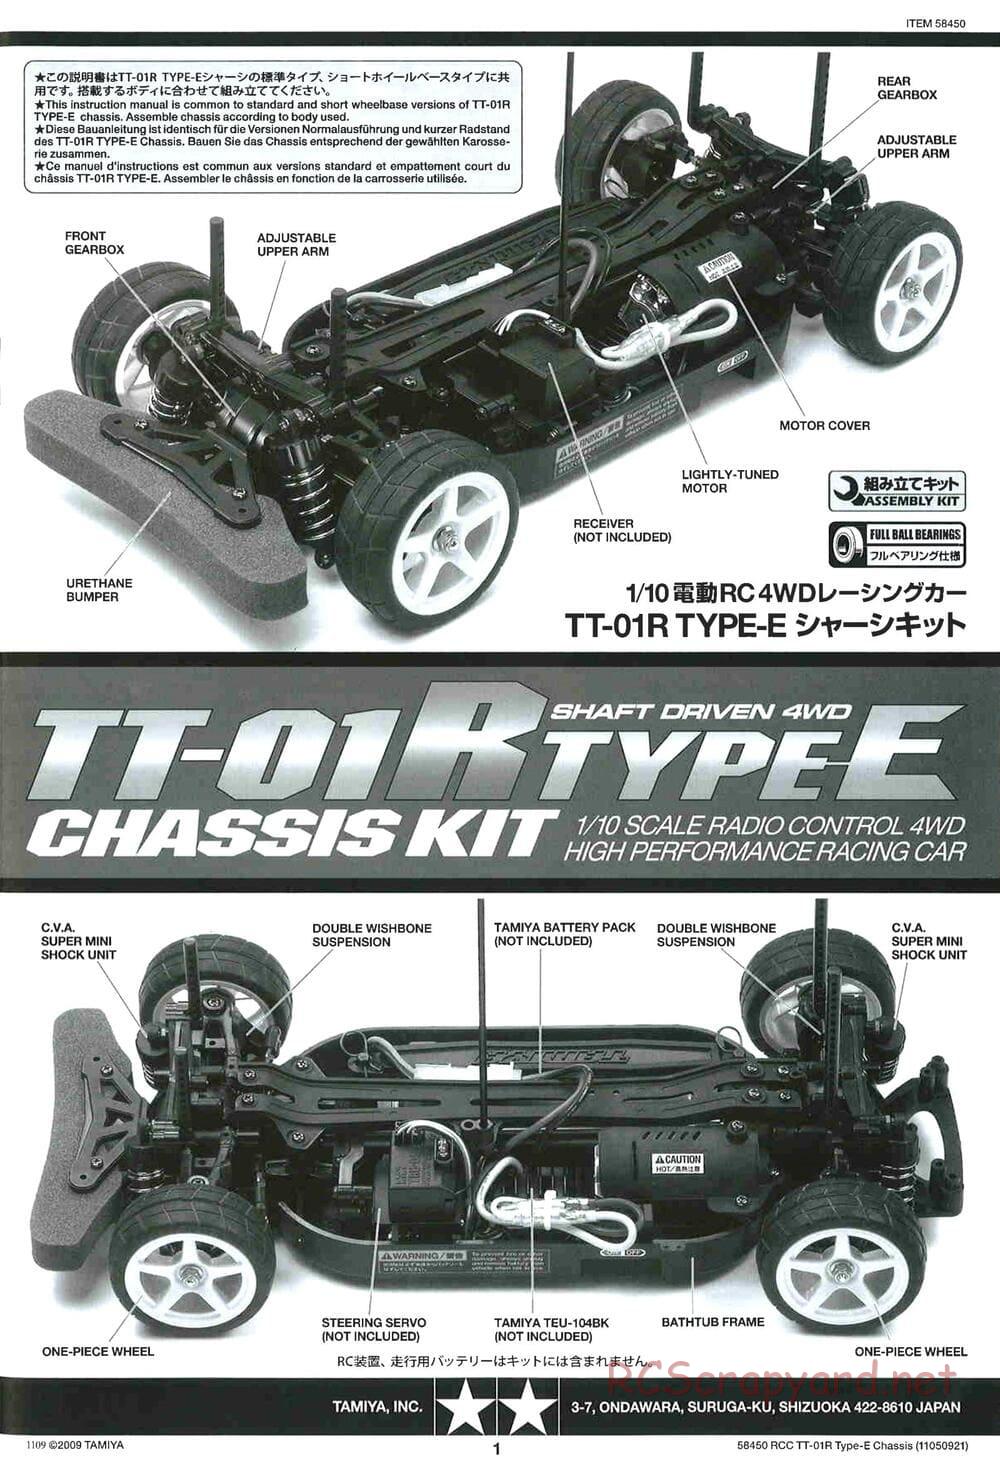 Tamiya - TT-01R Type-E Chassis - Manual - Page 1